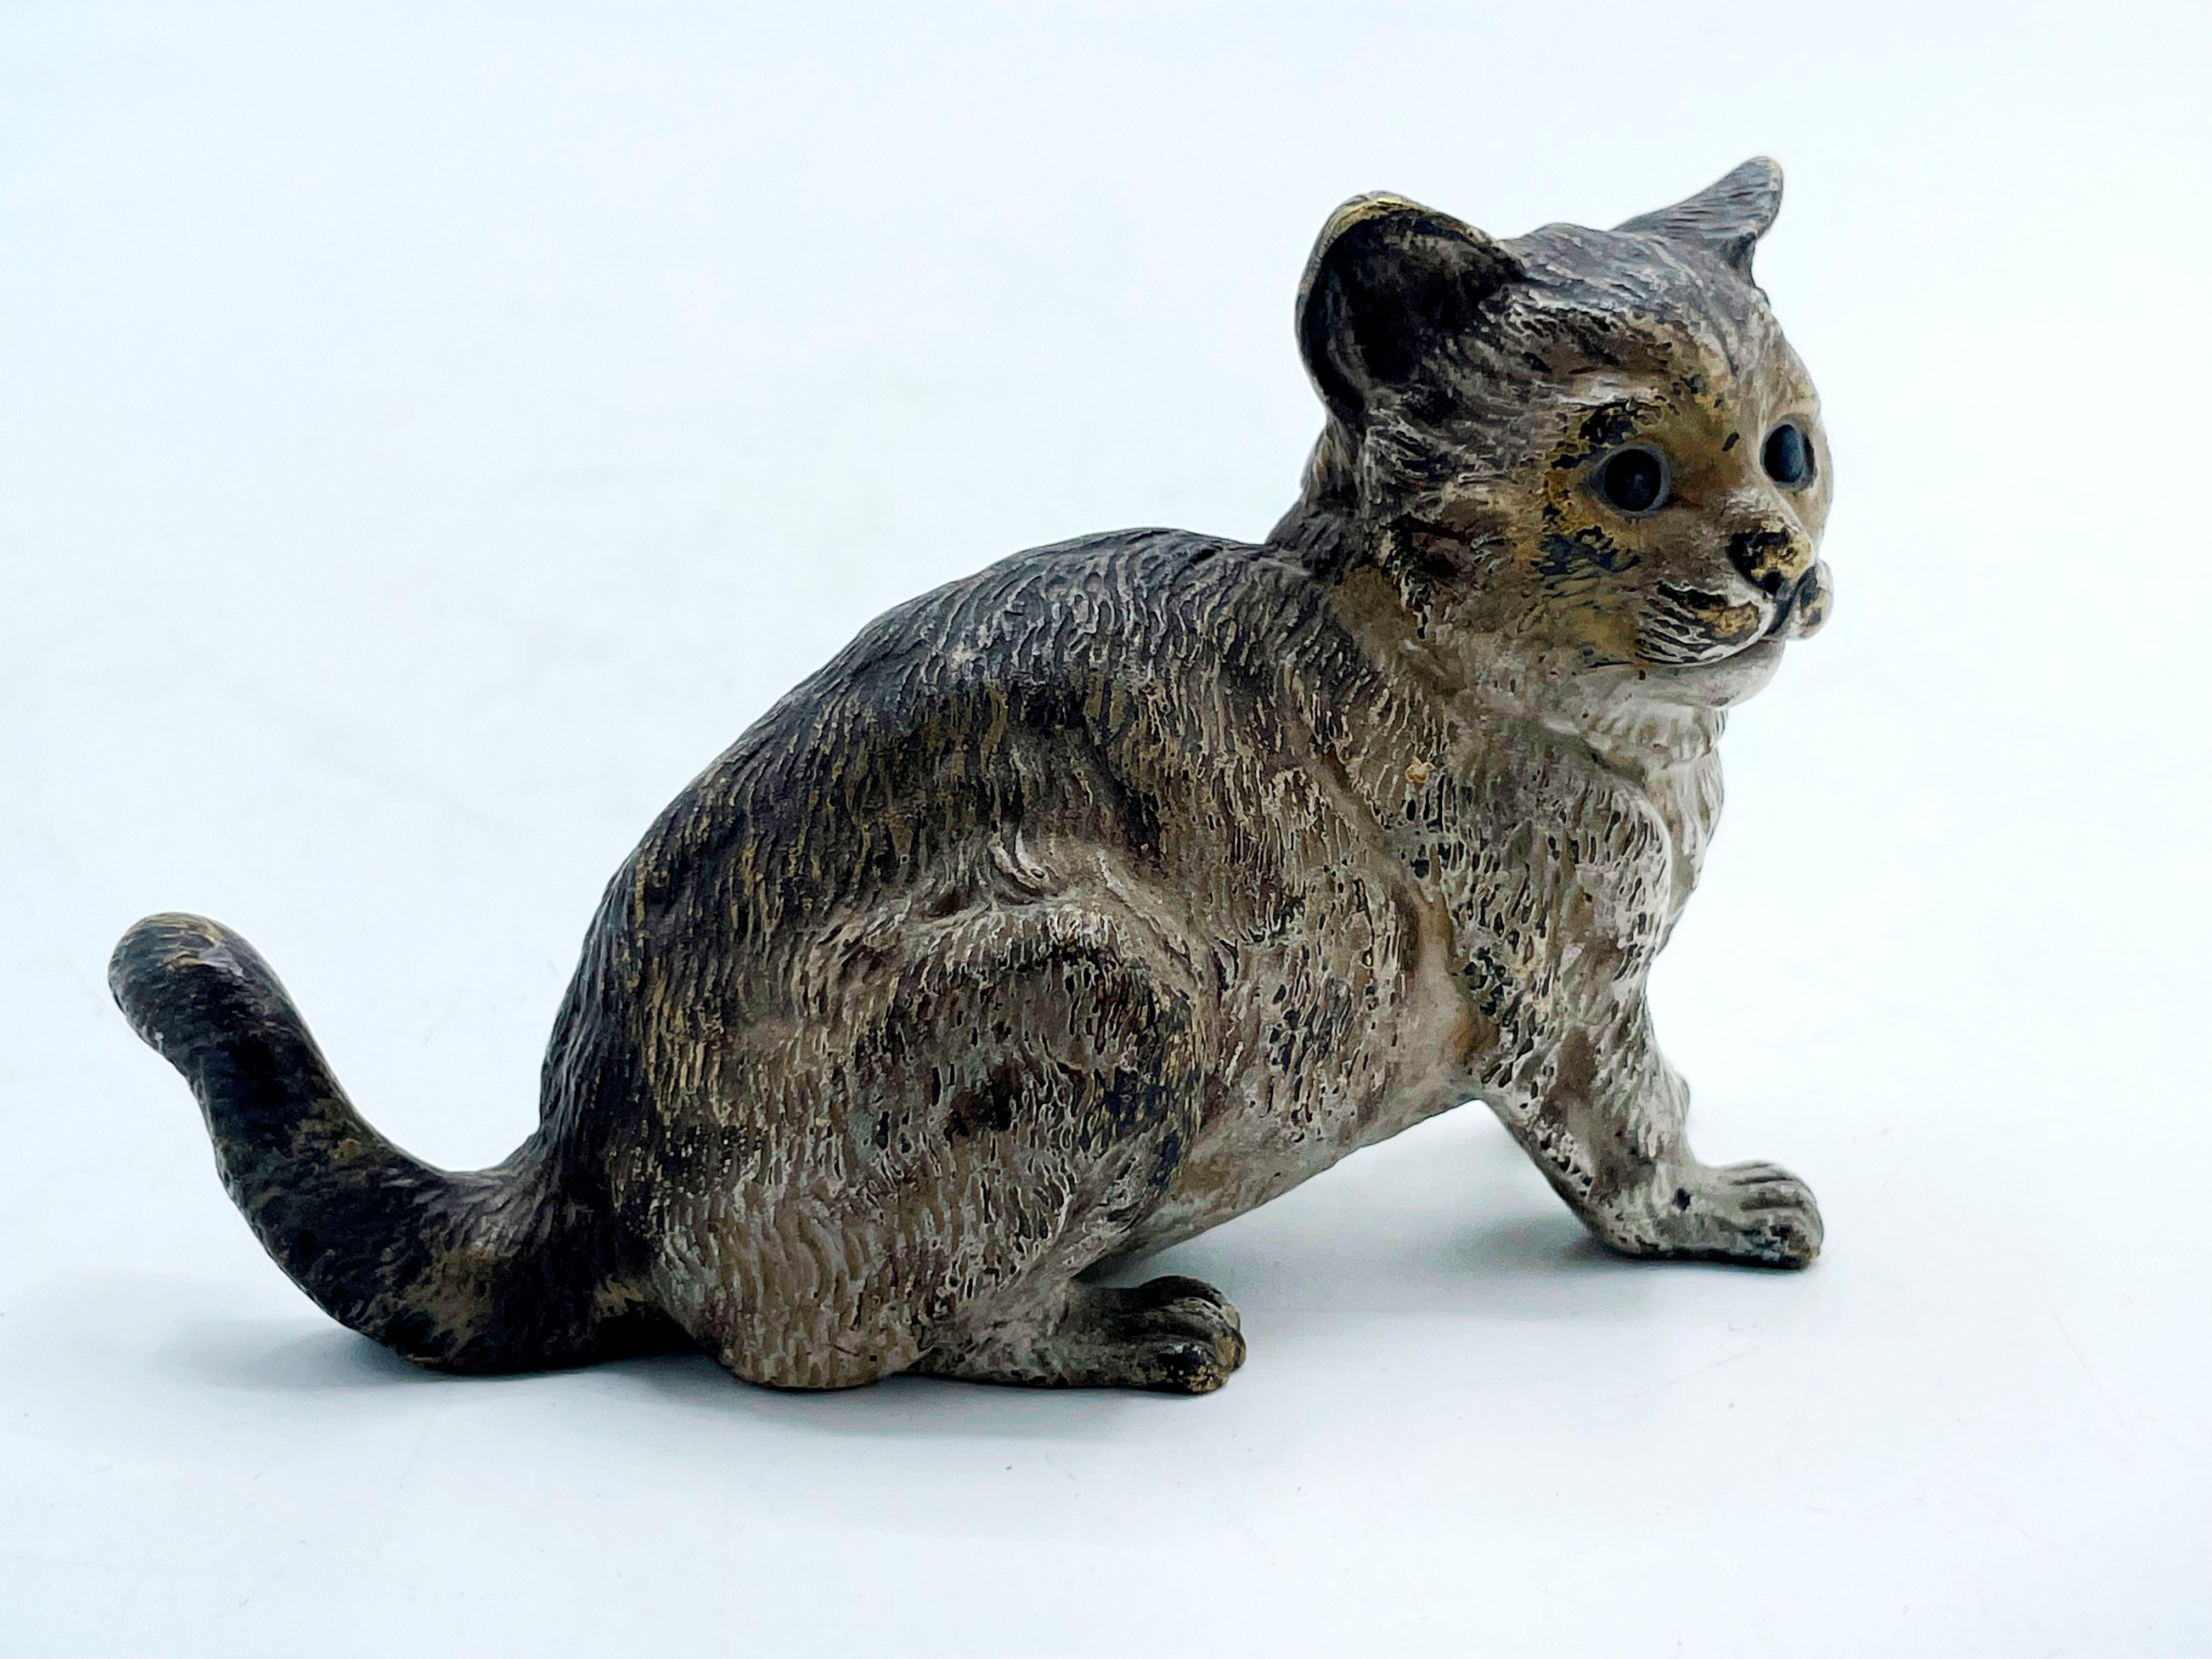 Antique Vienna bronze sculpture of a cat by Bergman. Stamped FB and Geschutzt. Cold painted patina. This model is illustrated in “Antique Vienna bronzes” by Joseph Zobel. Schiffer. More information: “Bronzes de Vienne” by Ernest Hrabalek, the